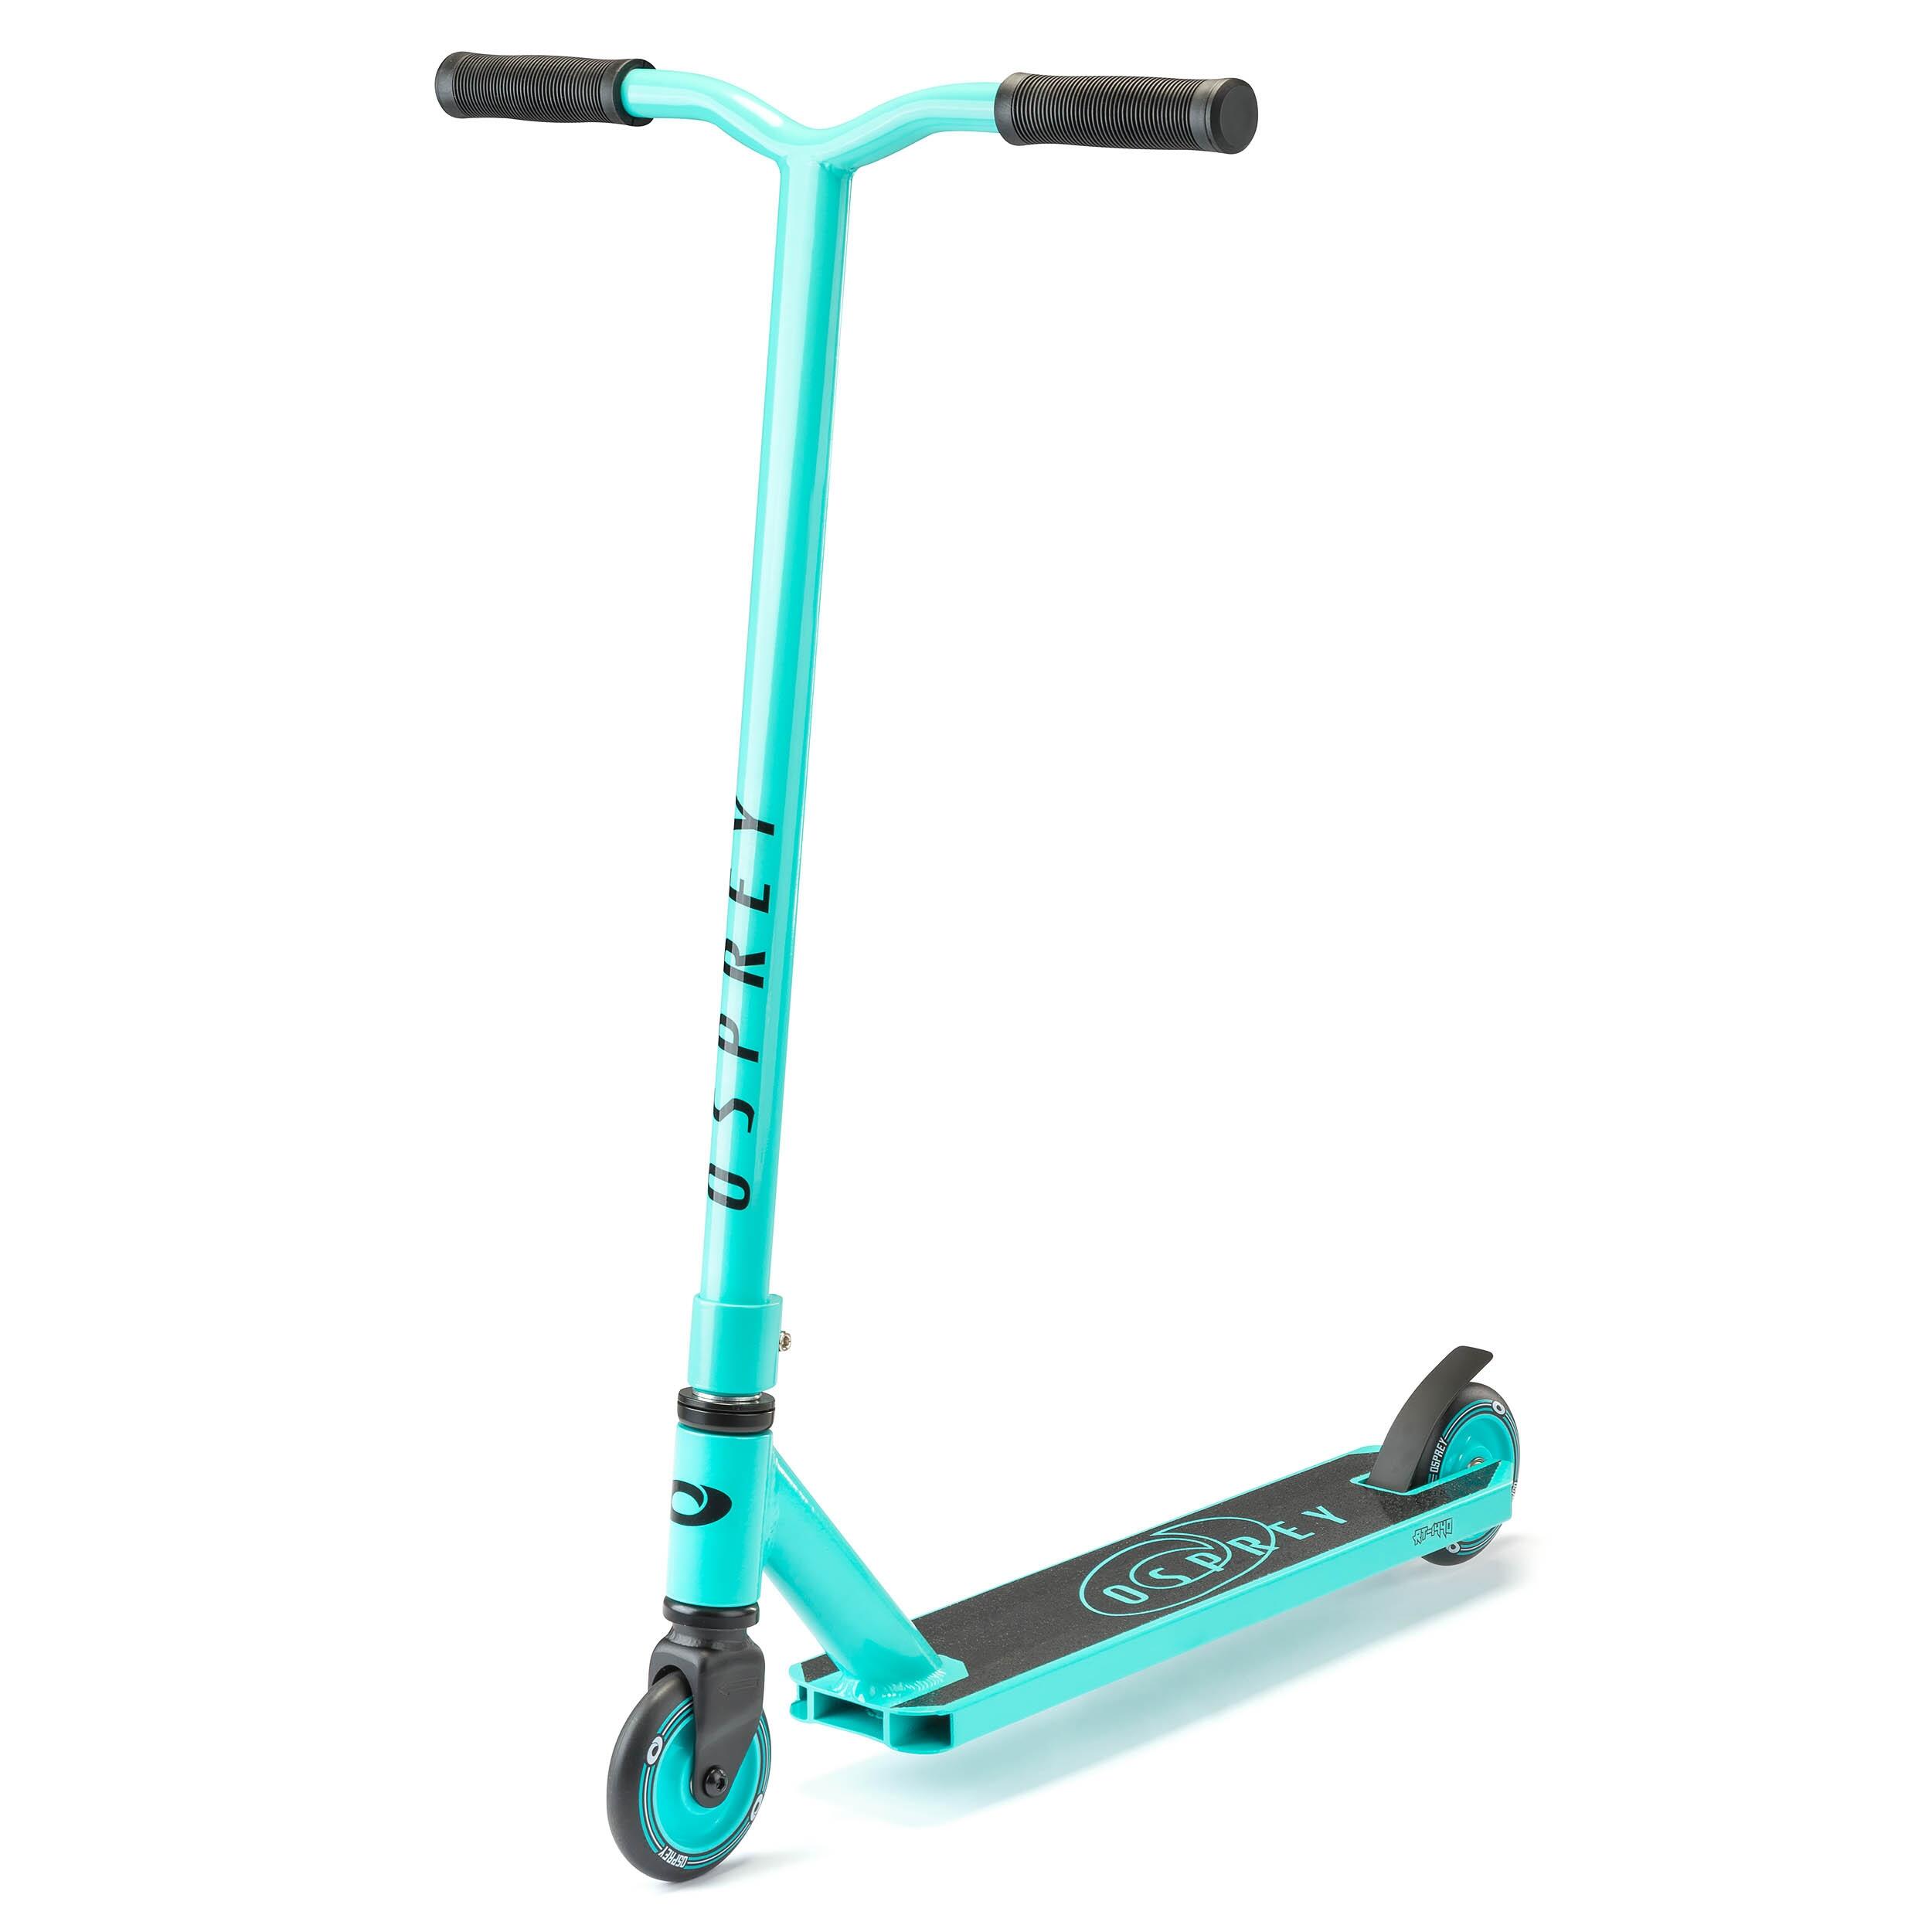 Osprey Stunt Scooter RT-1440, for Adults and Kids Kick T Bar Scooter 1/4